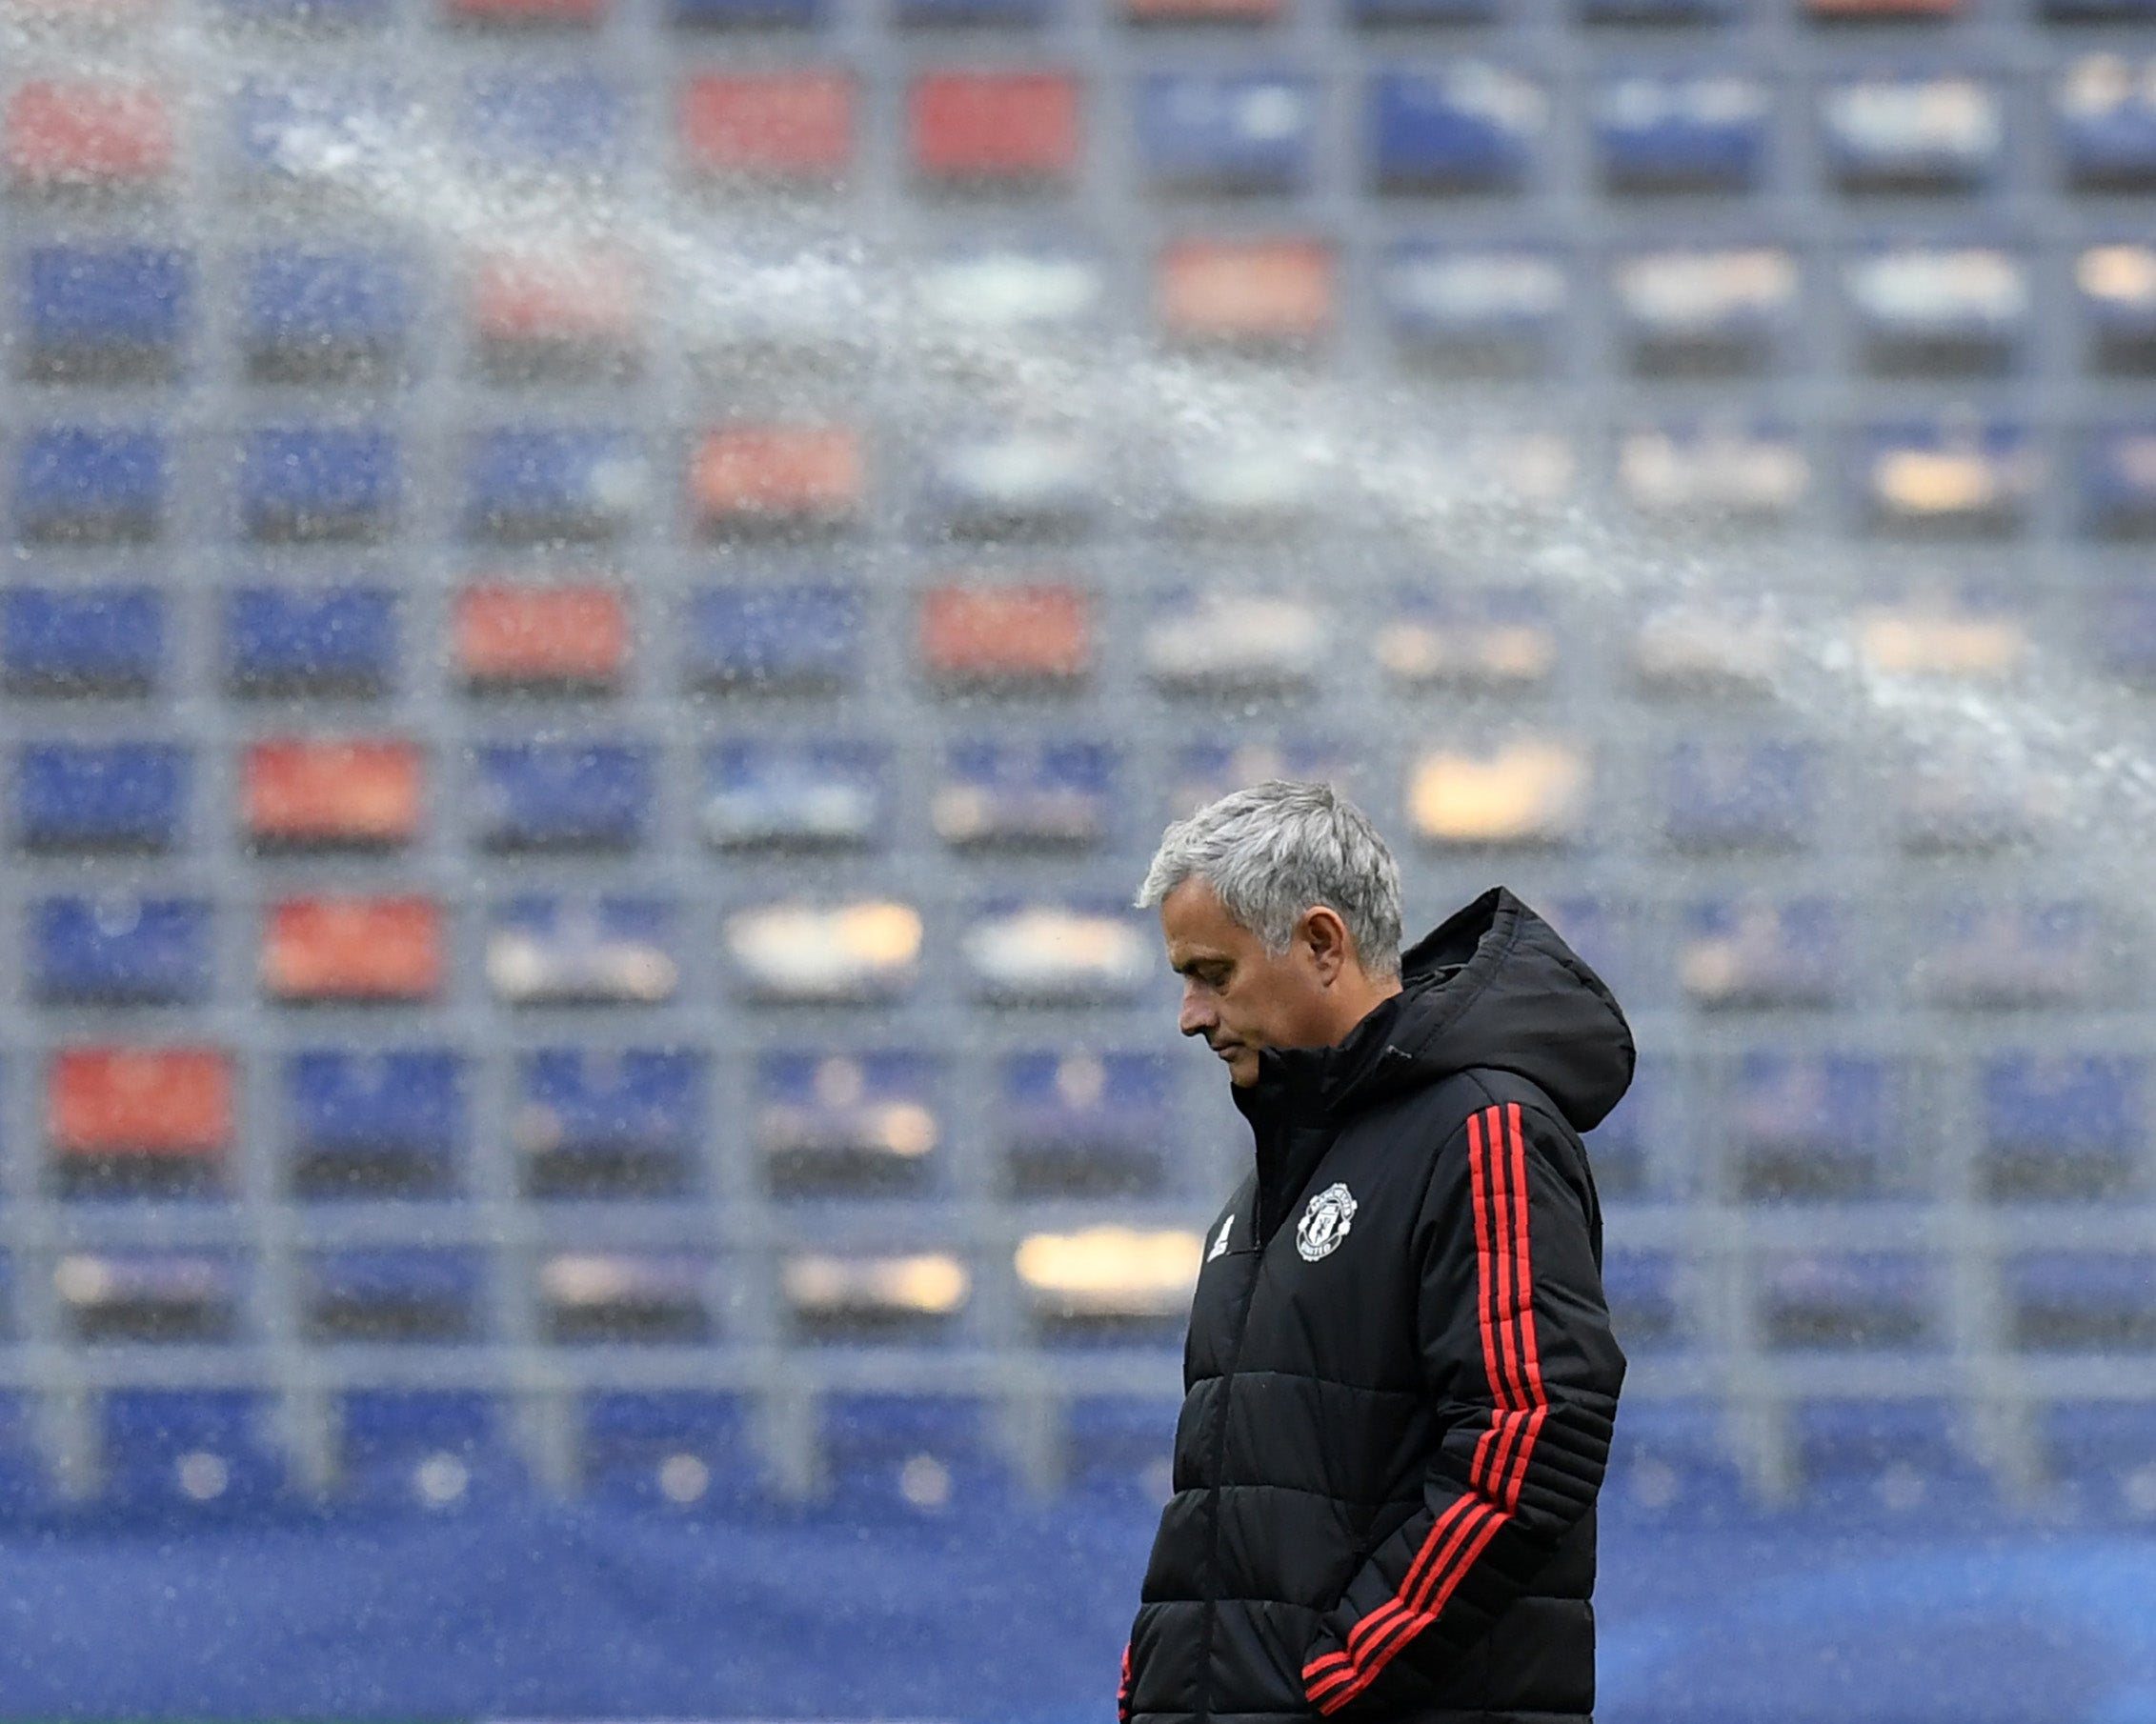 Mourinho has been called to appear in a Madrid court just as his side prepares for a title clash